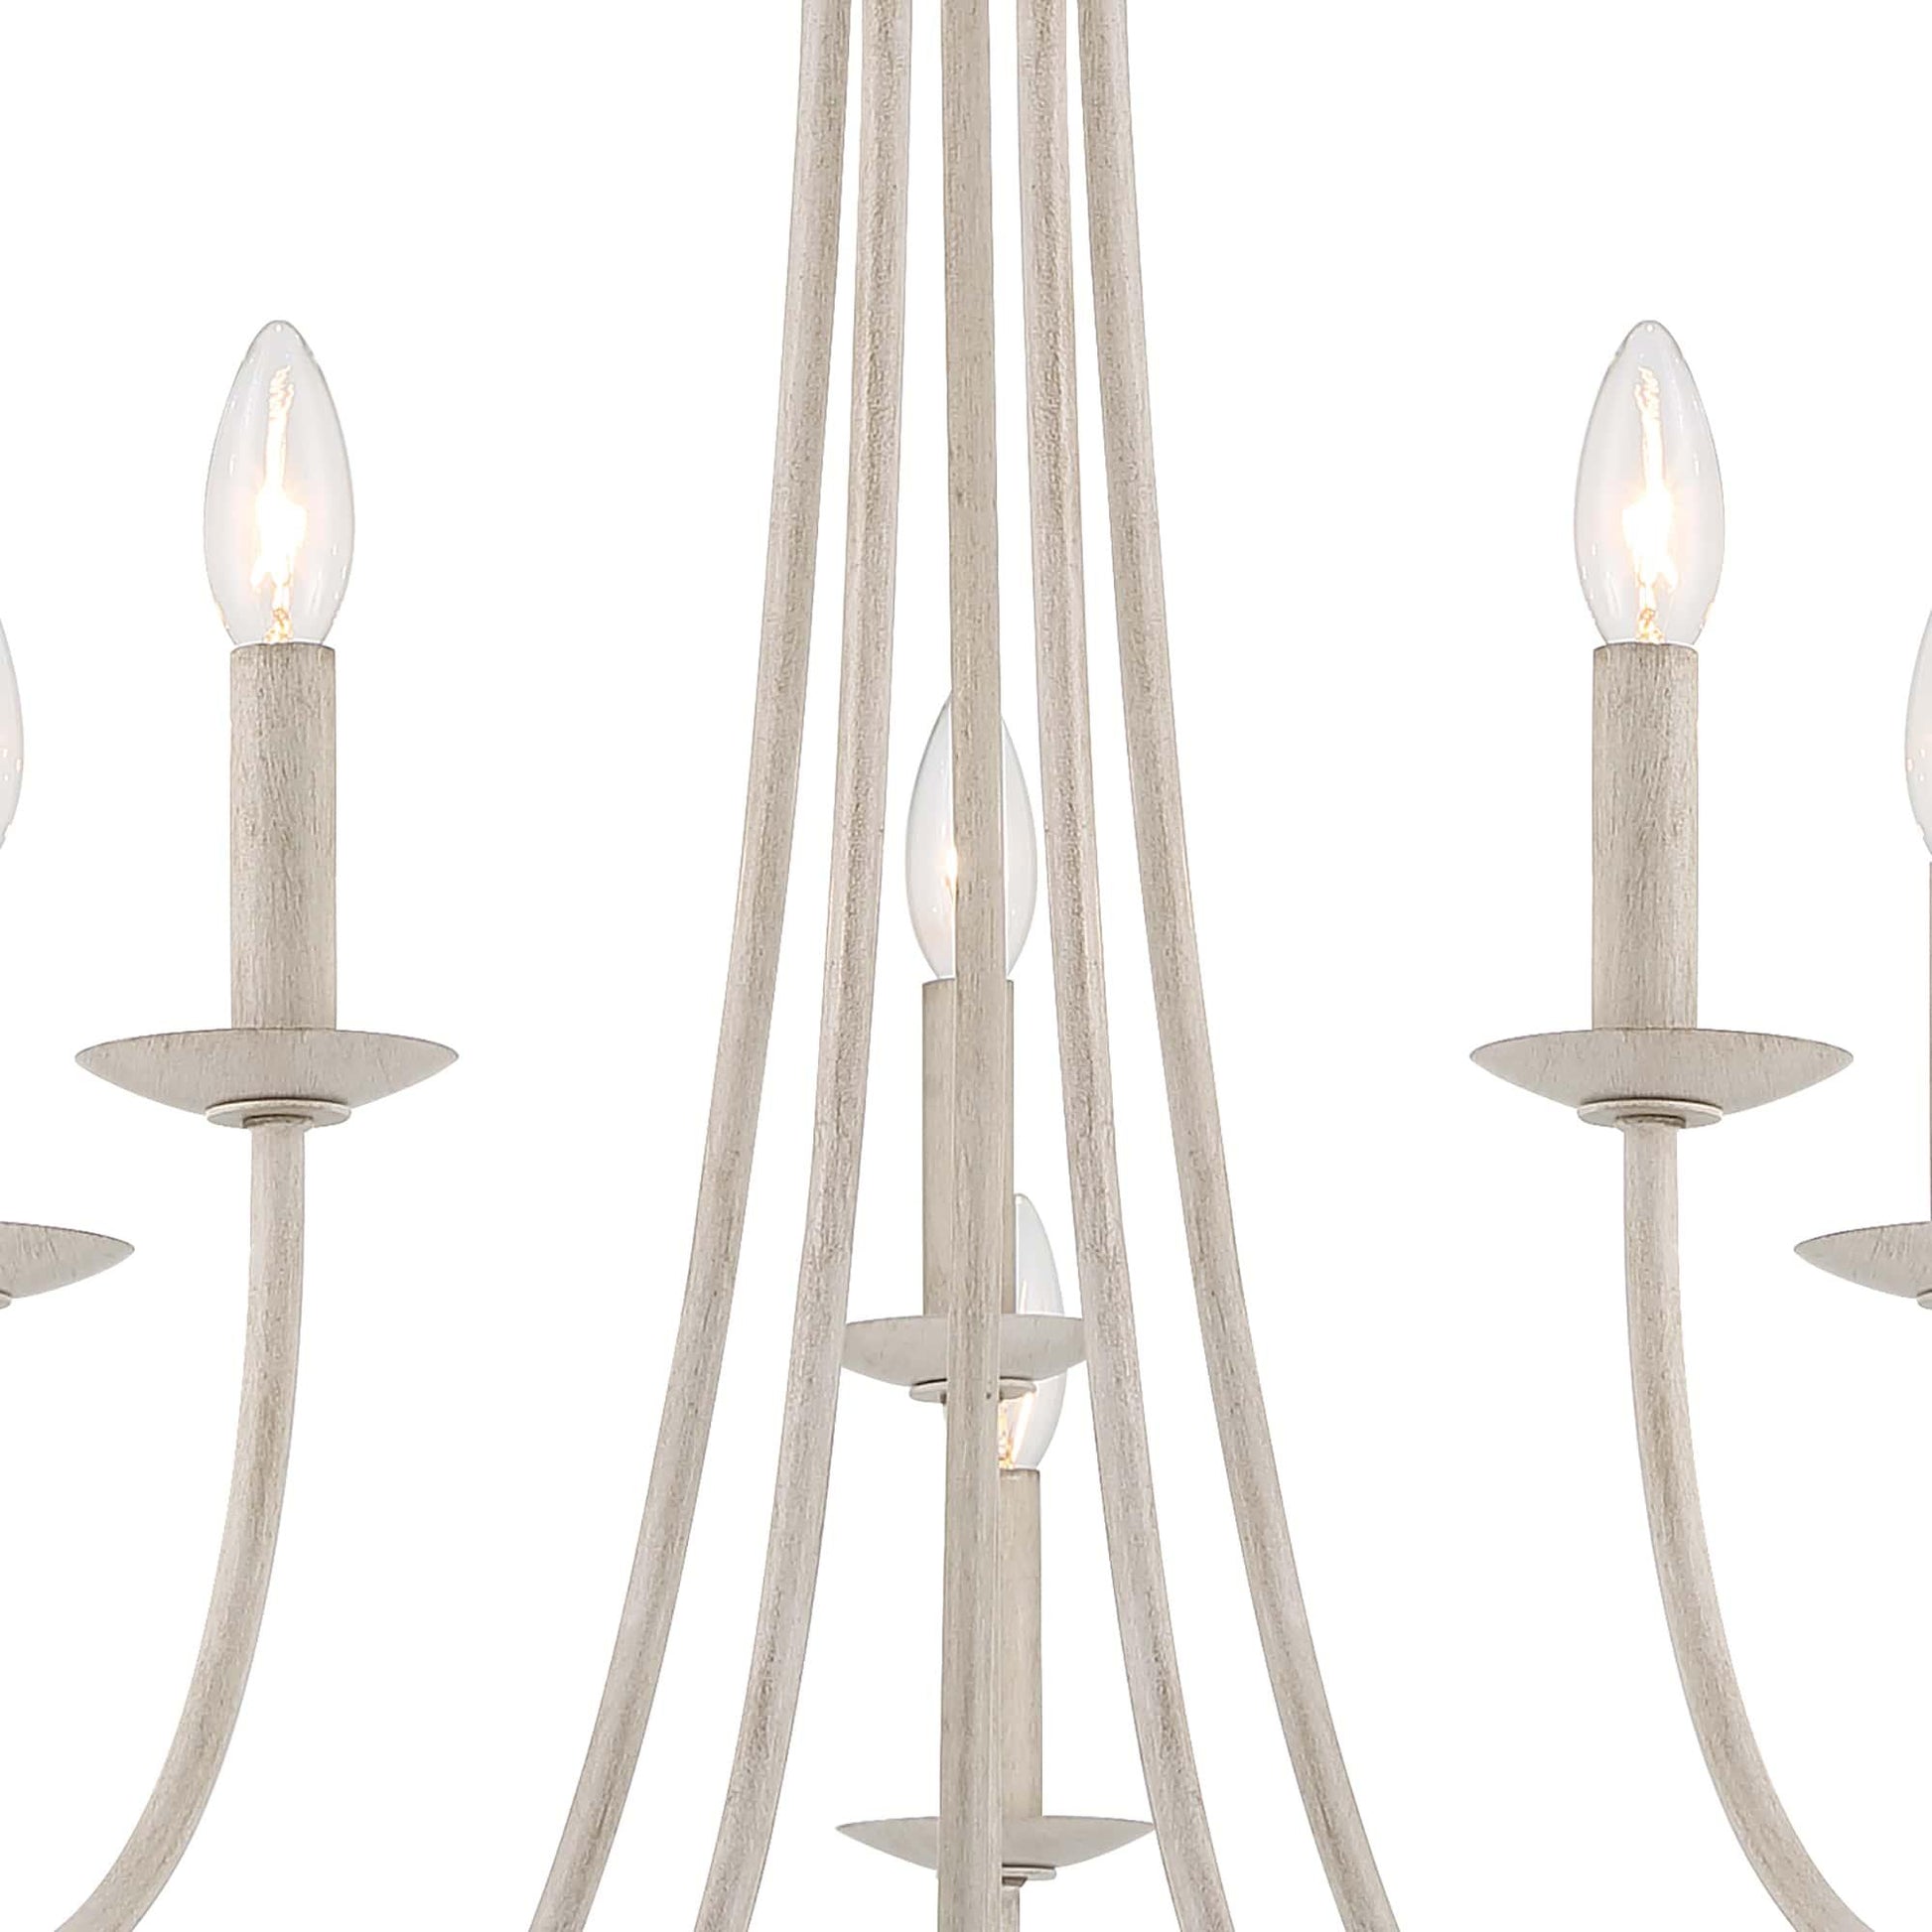 10 light candle style classic chandelier (12) by ACROMA